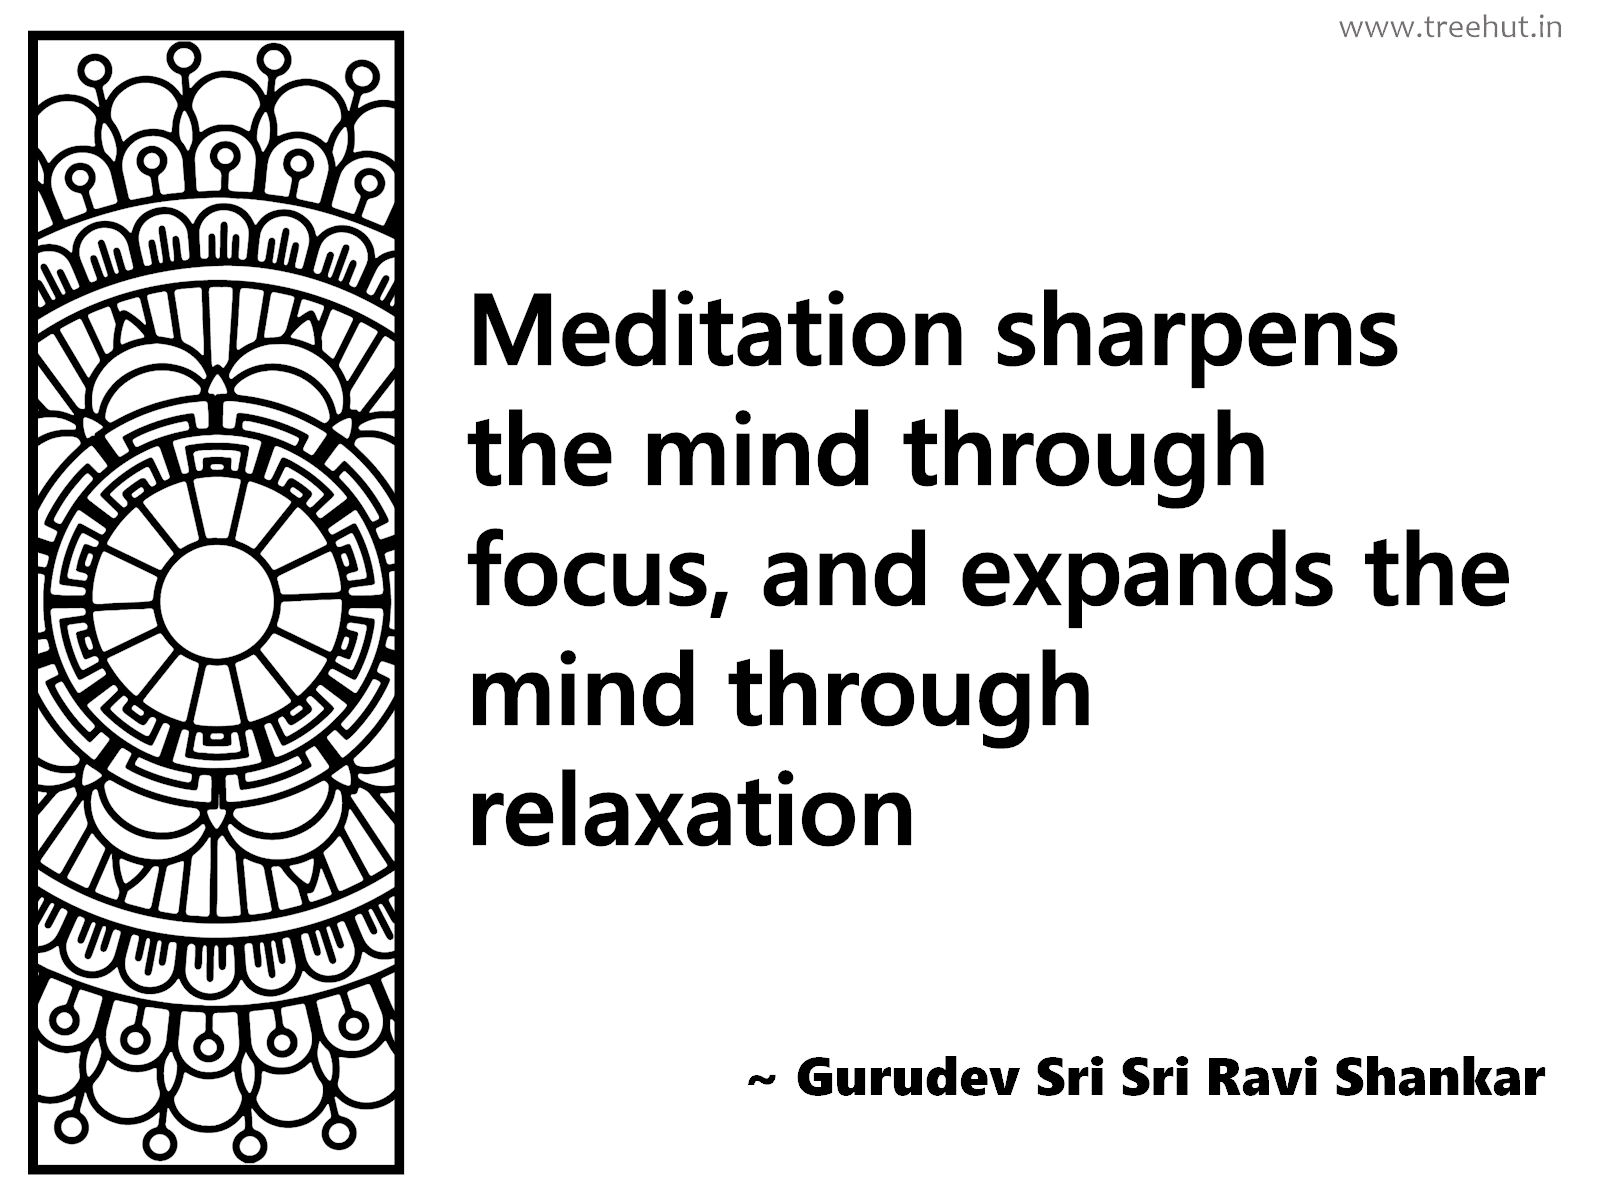 Meditation sharpens the mind through focus, and expands the mind through relaxation Inspirational Quote by Gurudev Sri Sri Ravi Shankar, coloring pages